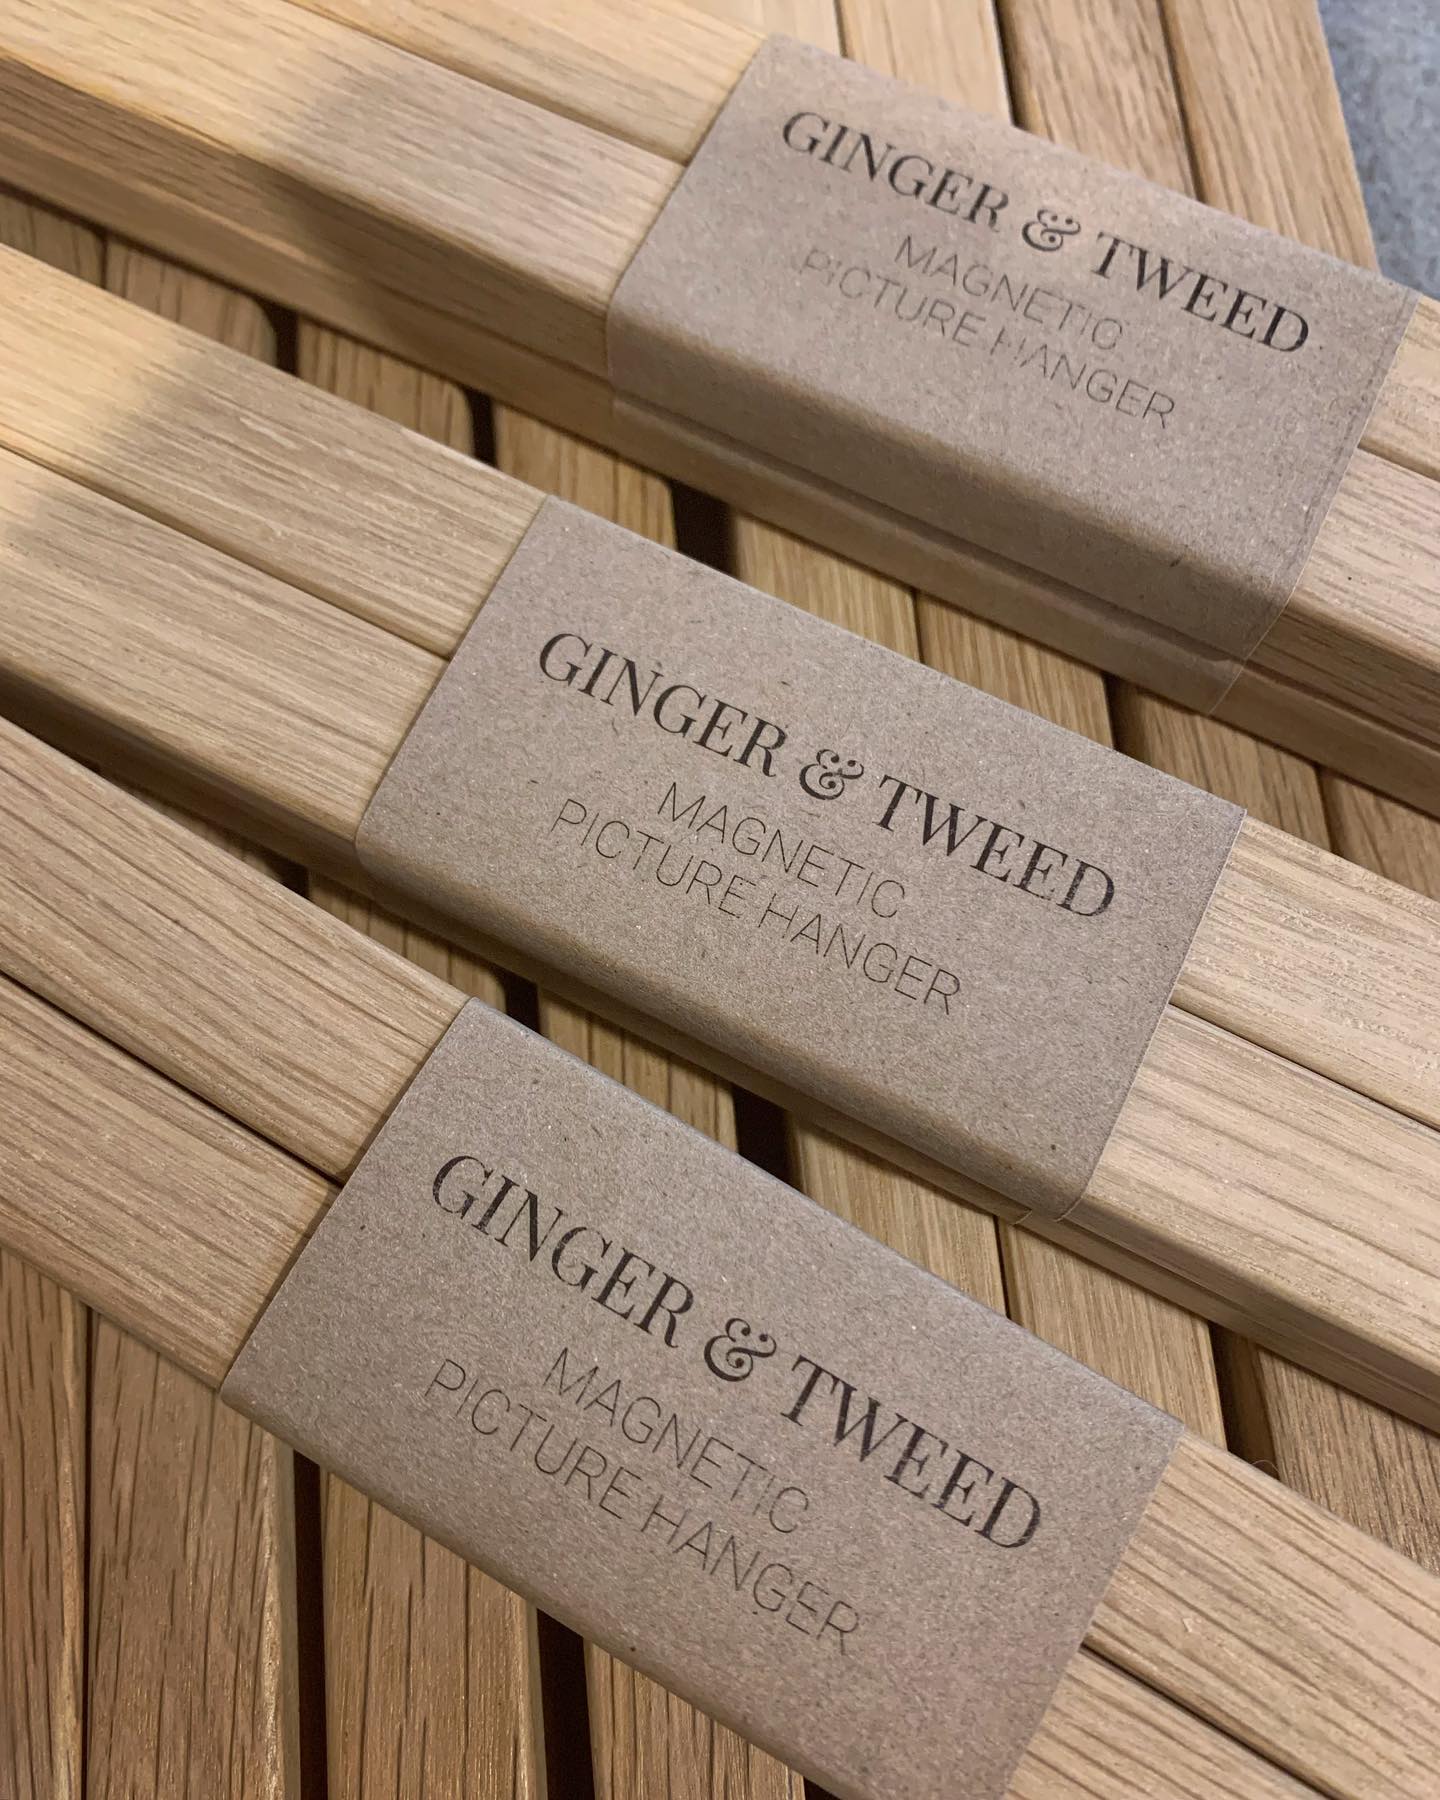 Loving the new recycled brown paper labels on our Magnetic Picture Hangers, a favourite gift idea over the festive season! Now fully restocked. Available online in 2 sizes. #handmade #oak #poster #artwork #magnetic #gift #valentinesday #gingerandtweed #homedecor #madeintheuk #countryliving #scandistyle #minimalstyle #simpleanduseful #favouriteproducts